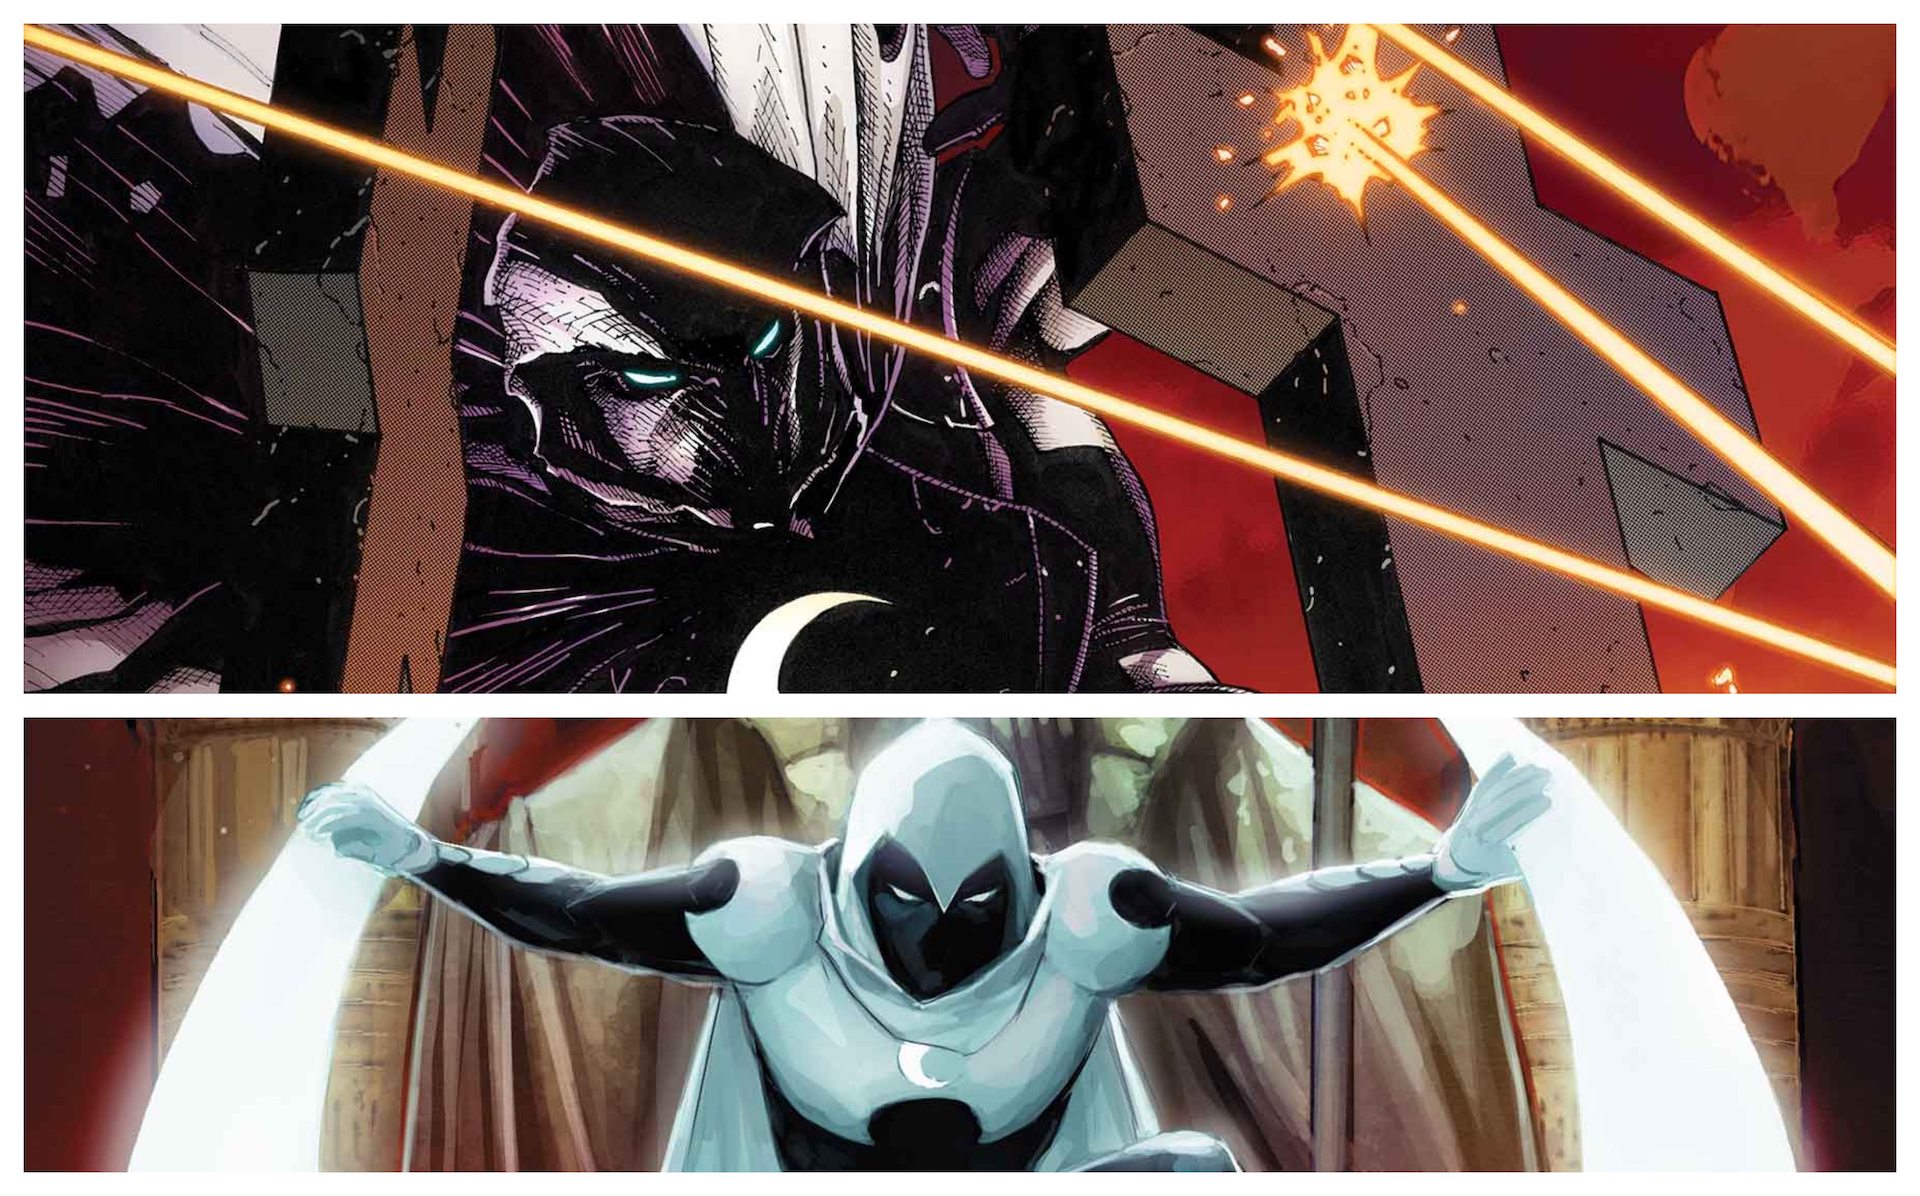 'Moon Knight' gets anniversary special and new miniseries 'City of the Dead'